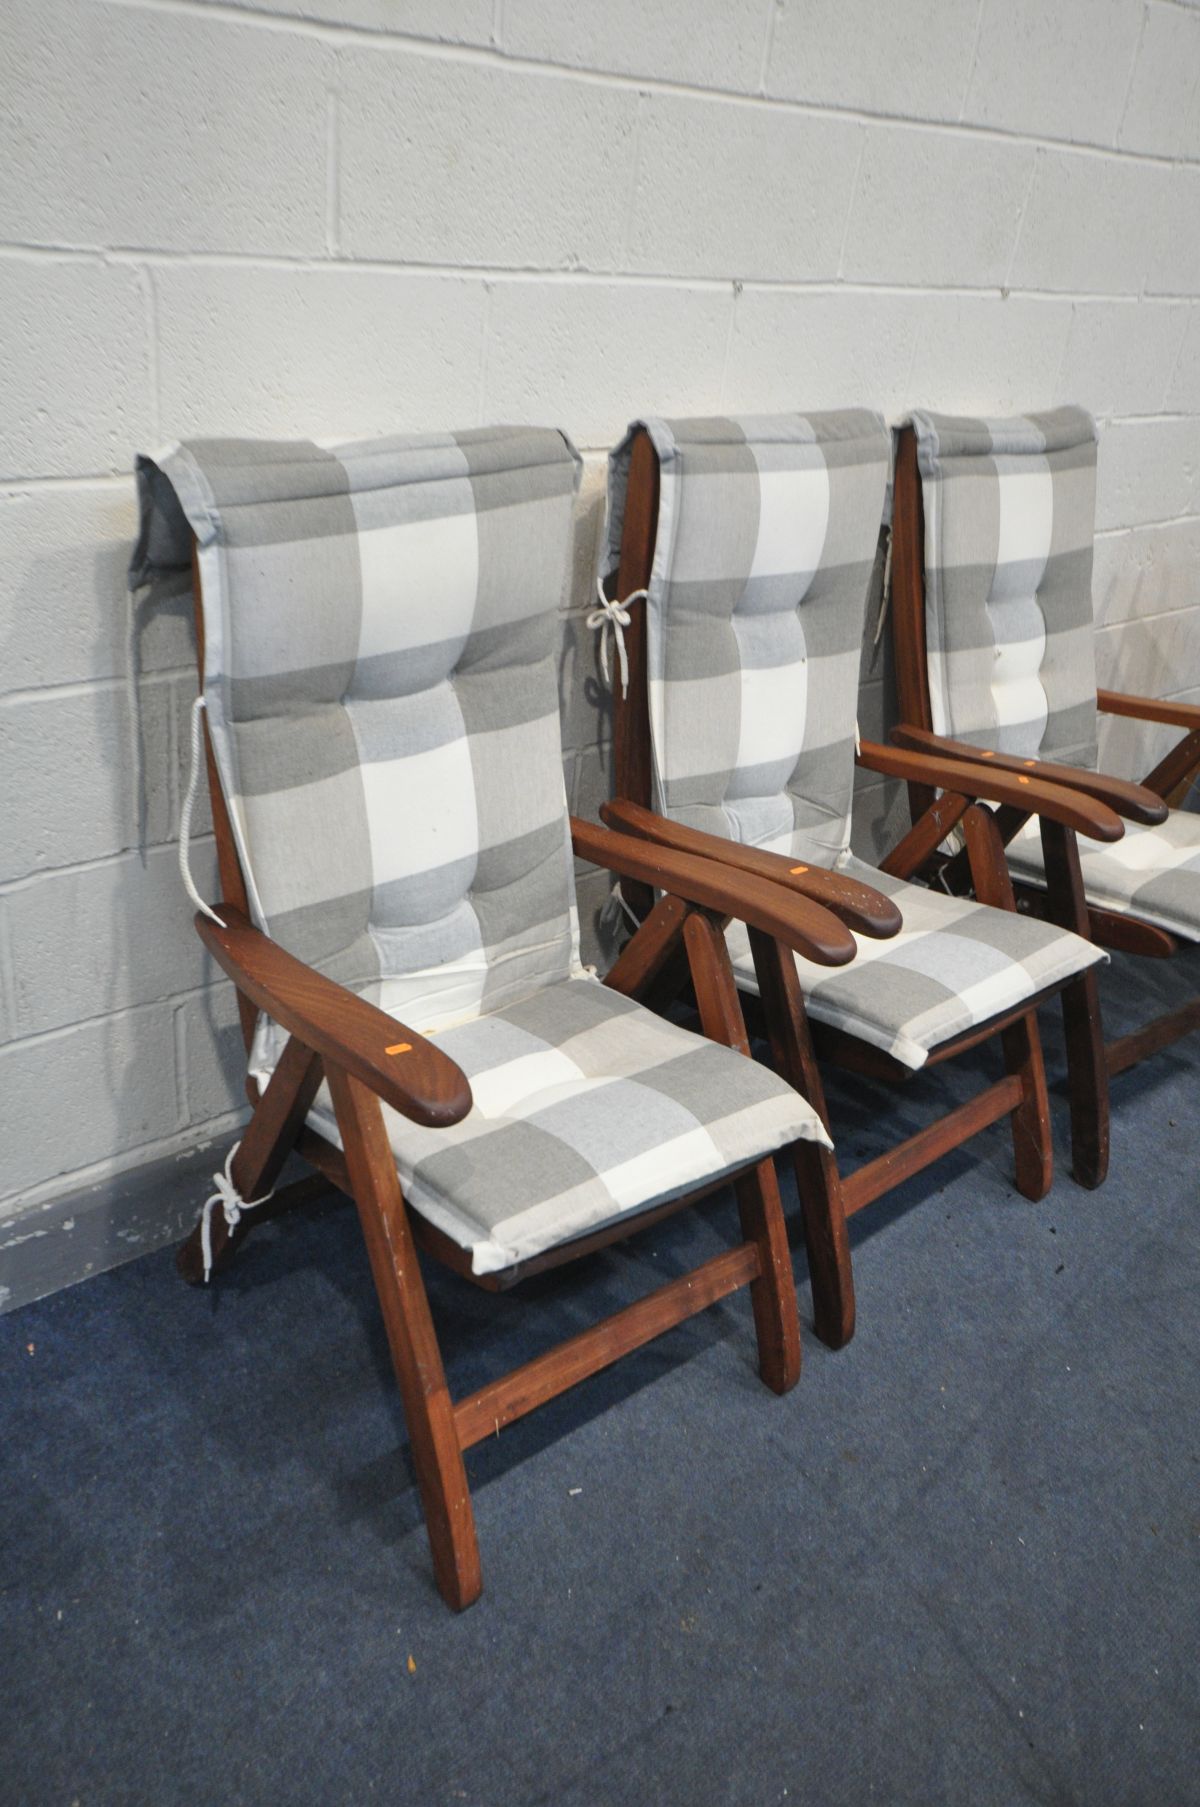 THREE TEAK FOLDING GARDEN CHAIRS, with patterned removable cushions, and a 1970's folding deck chair - Image 2 of 2